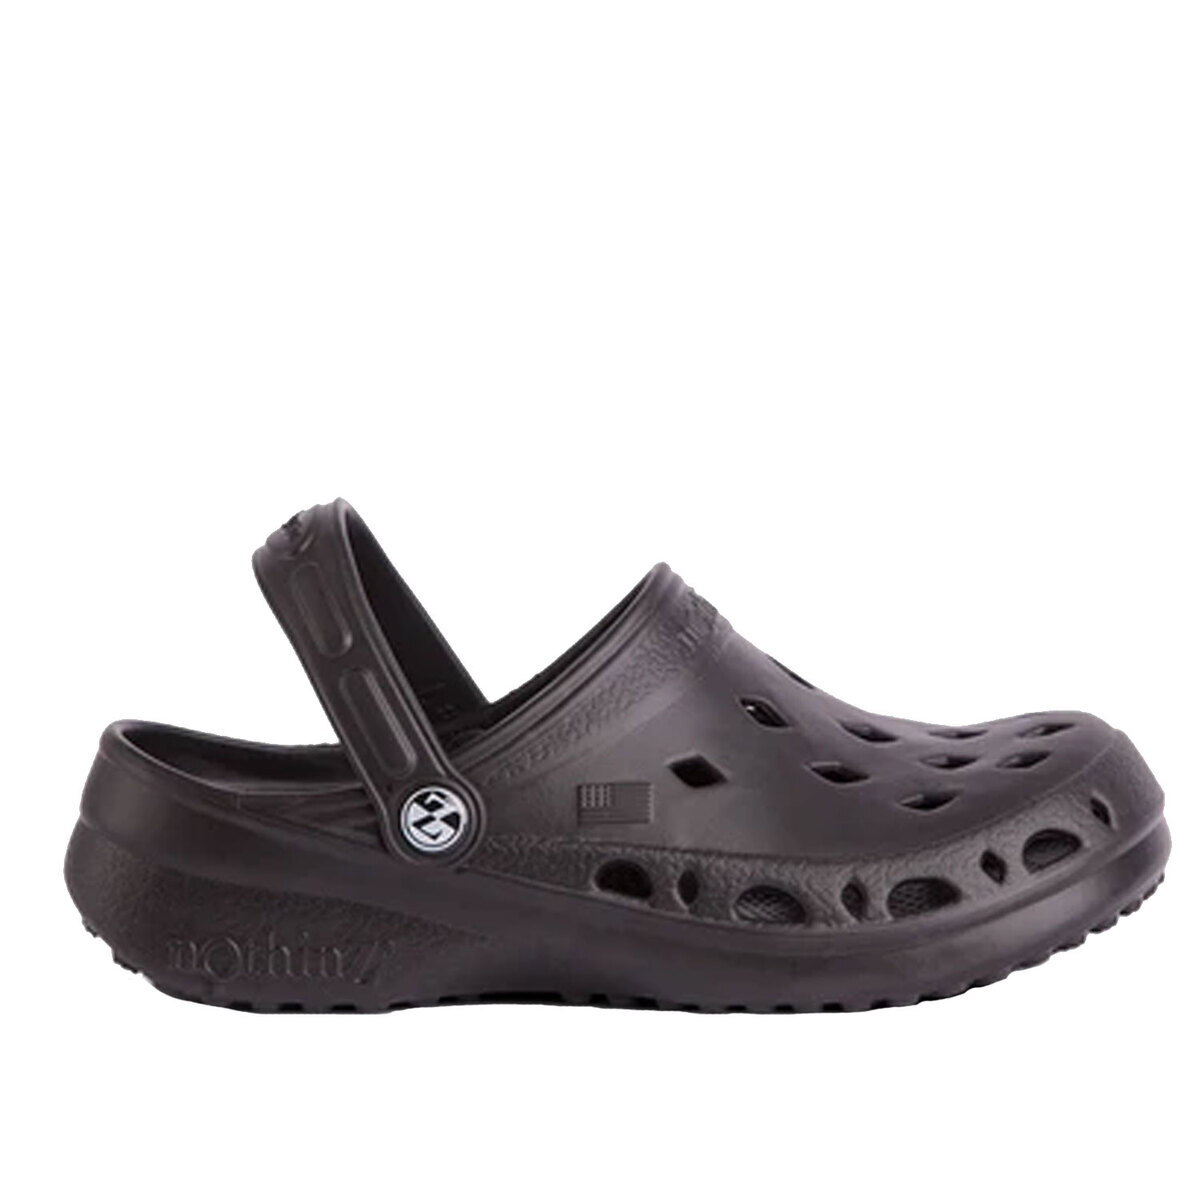 NothinZ Youth Clog Closed Toe Sandals | Sportsman's Warehouse